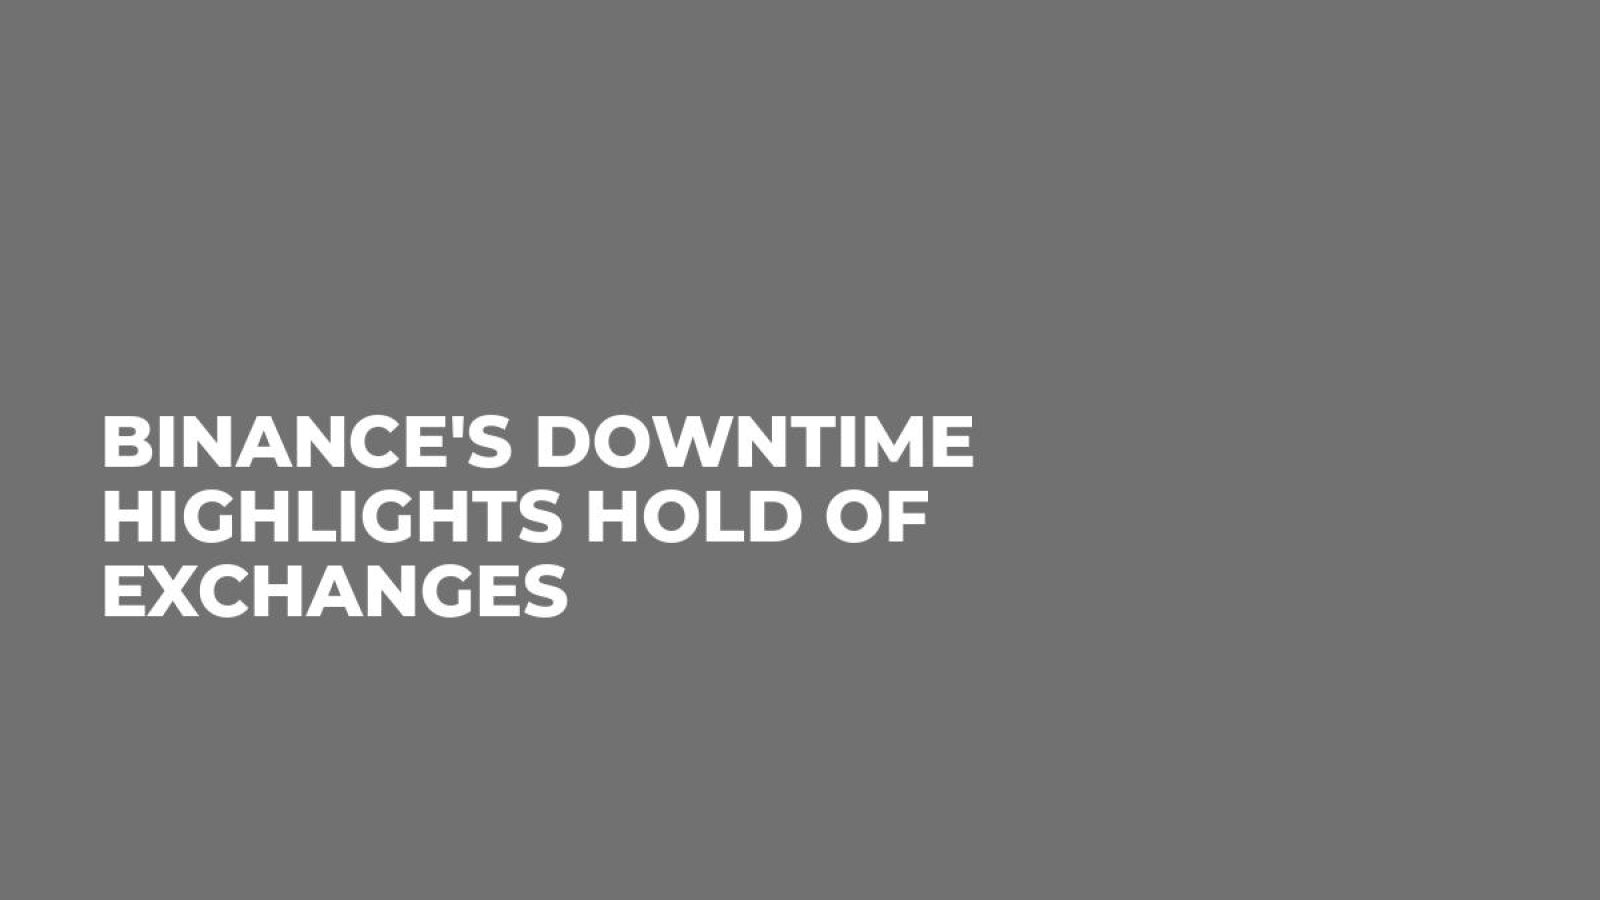 Binance's Downtime Highlights Hold of Exchanges